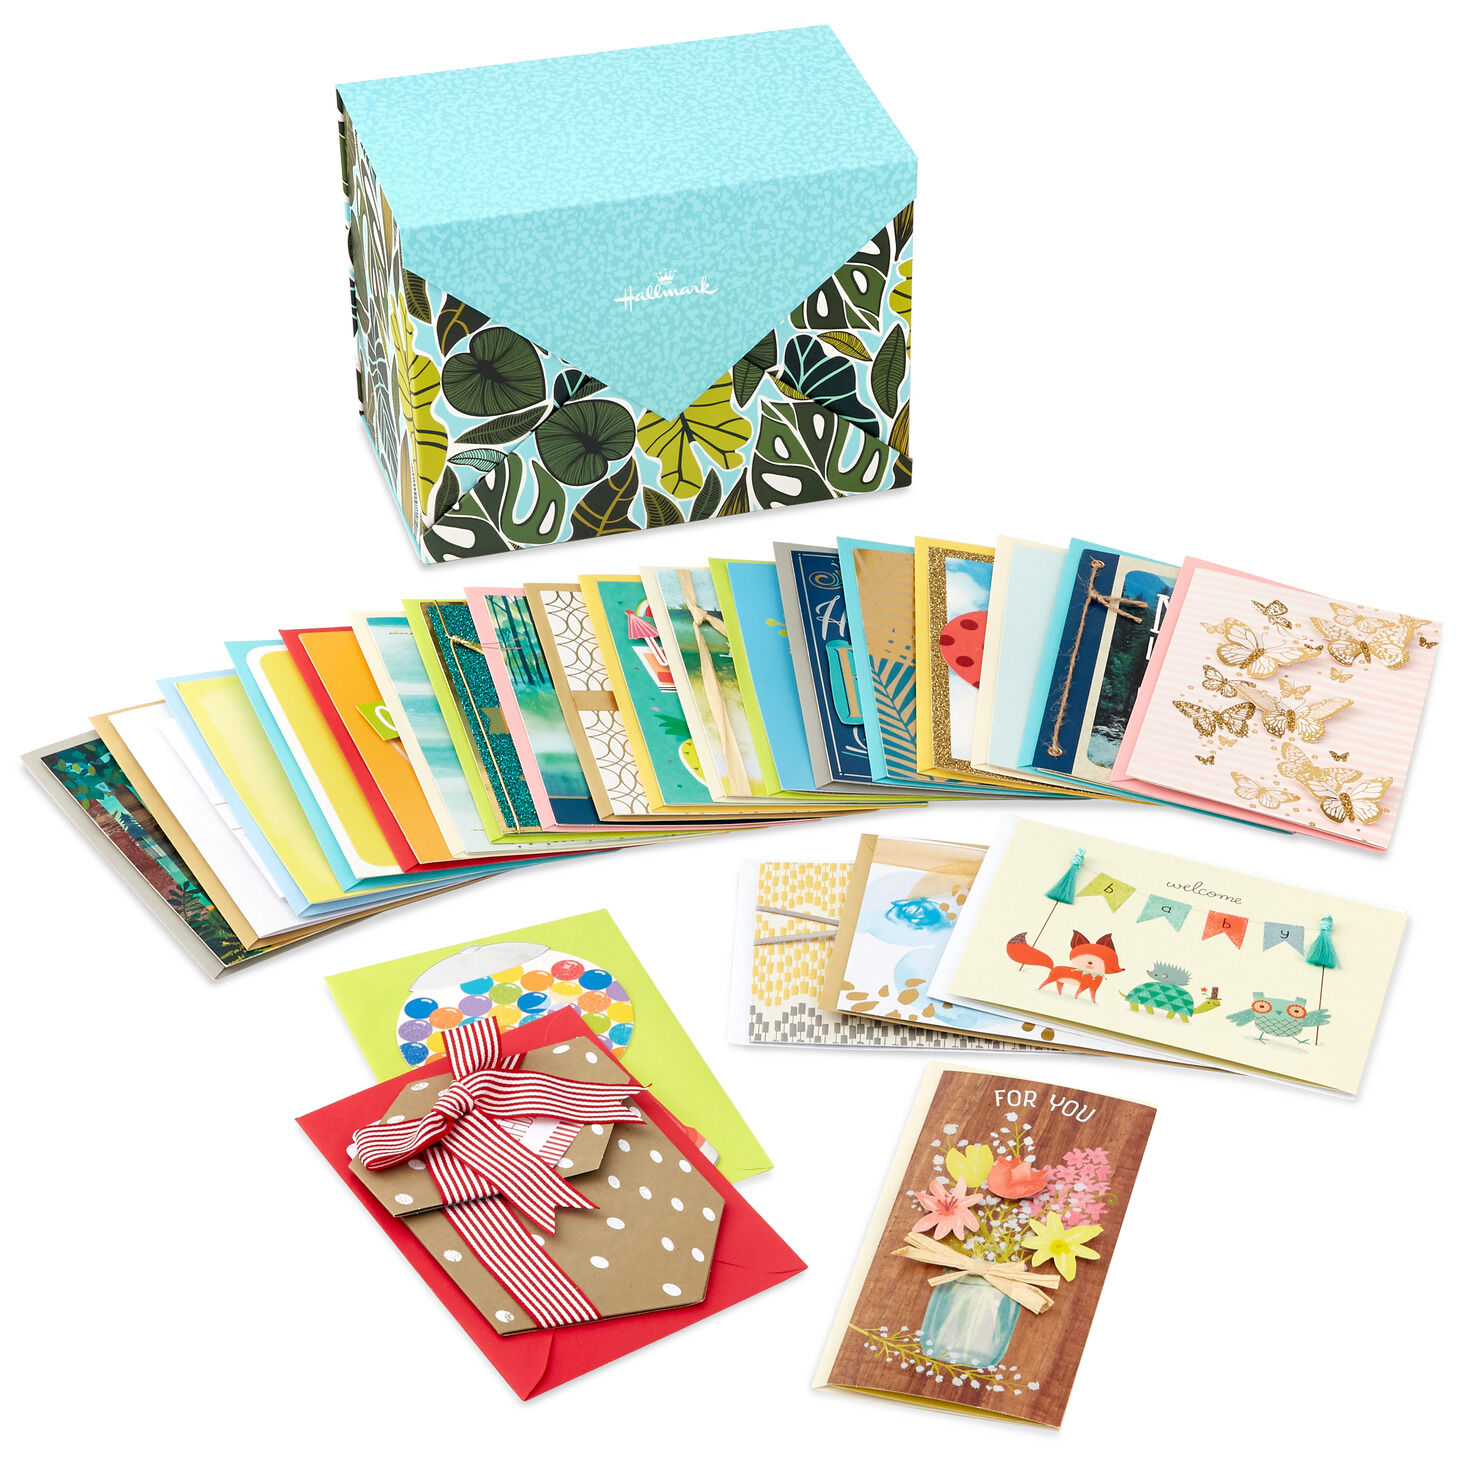 50 GREETING CARDS JOB LOT HIGH QUALITY CARDS ASSORTED DESIGNS WITH NO ENVELOPES 